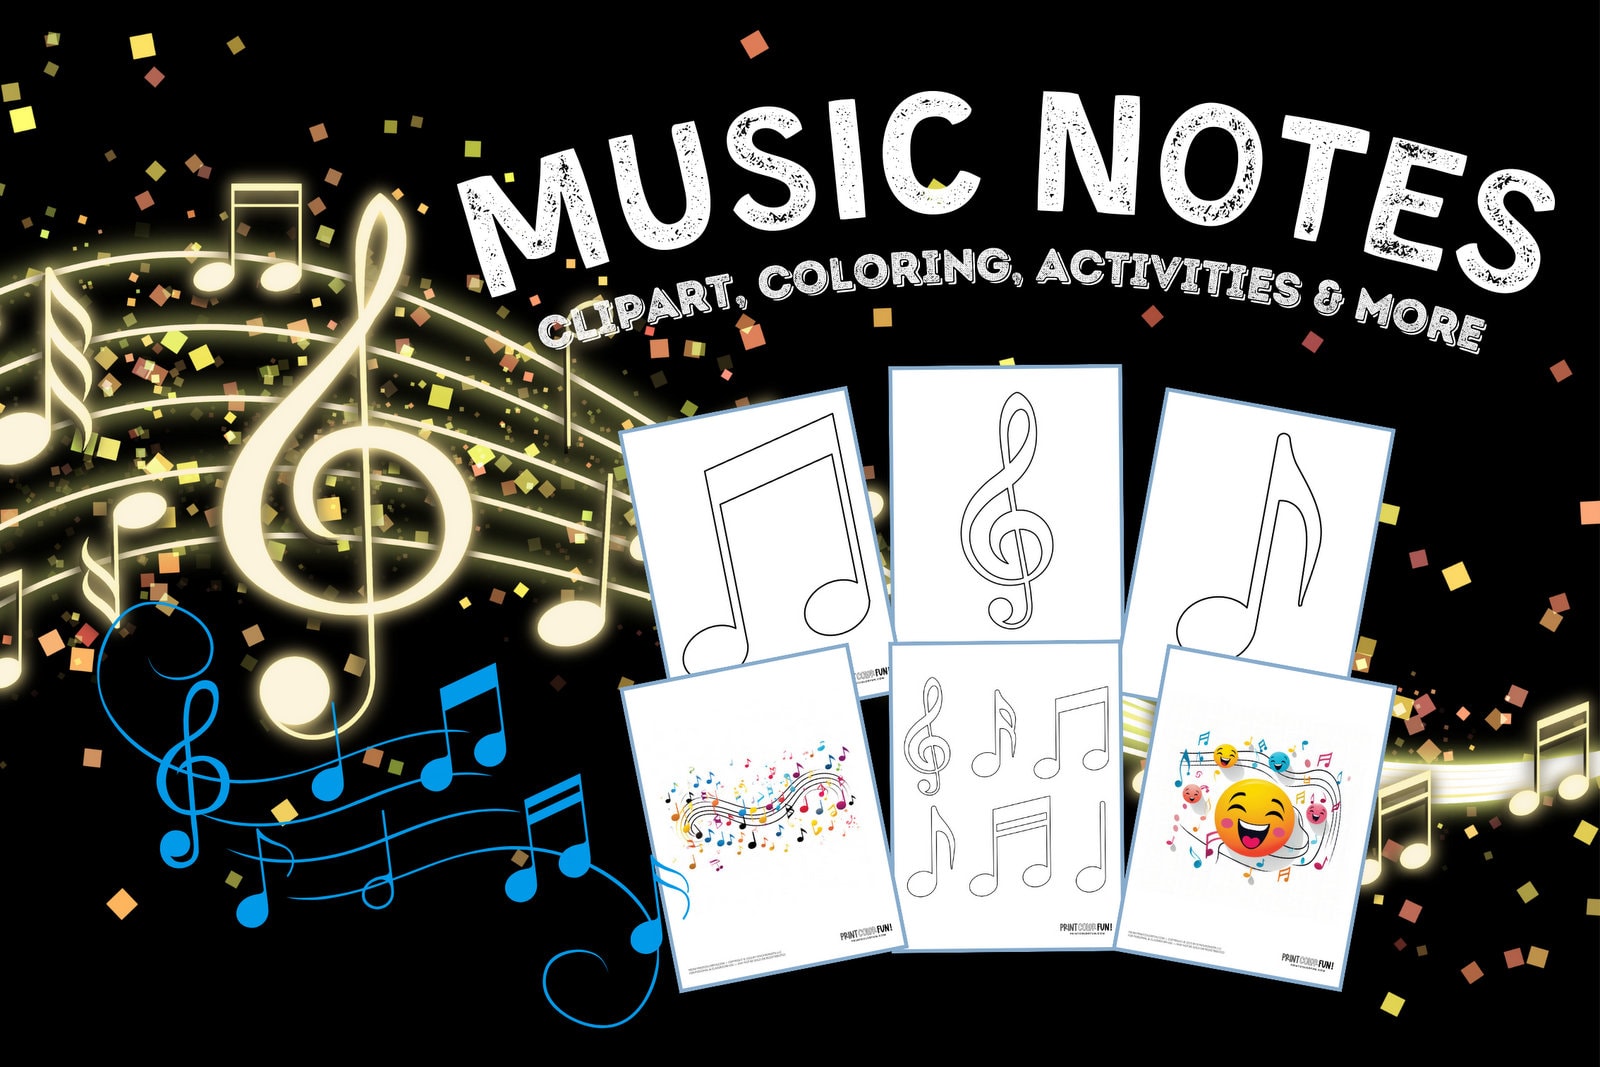 Winter Music Coloring Sheets  Color by Treble Clef Note Names